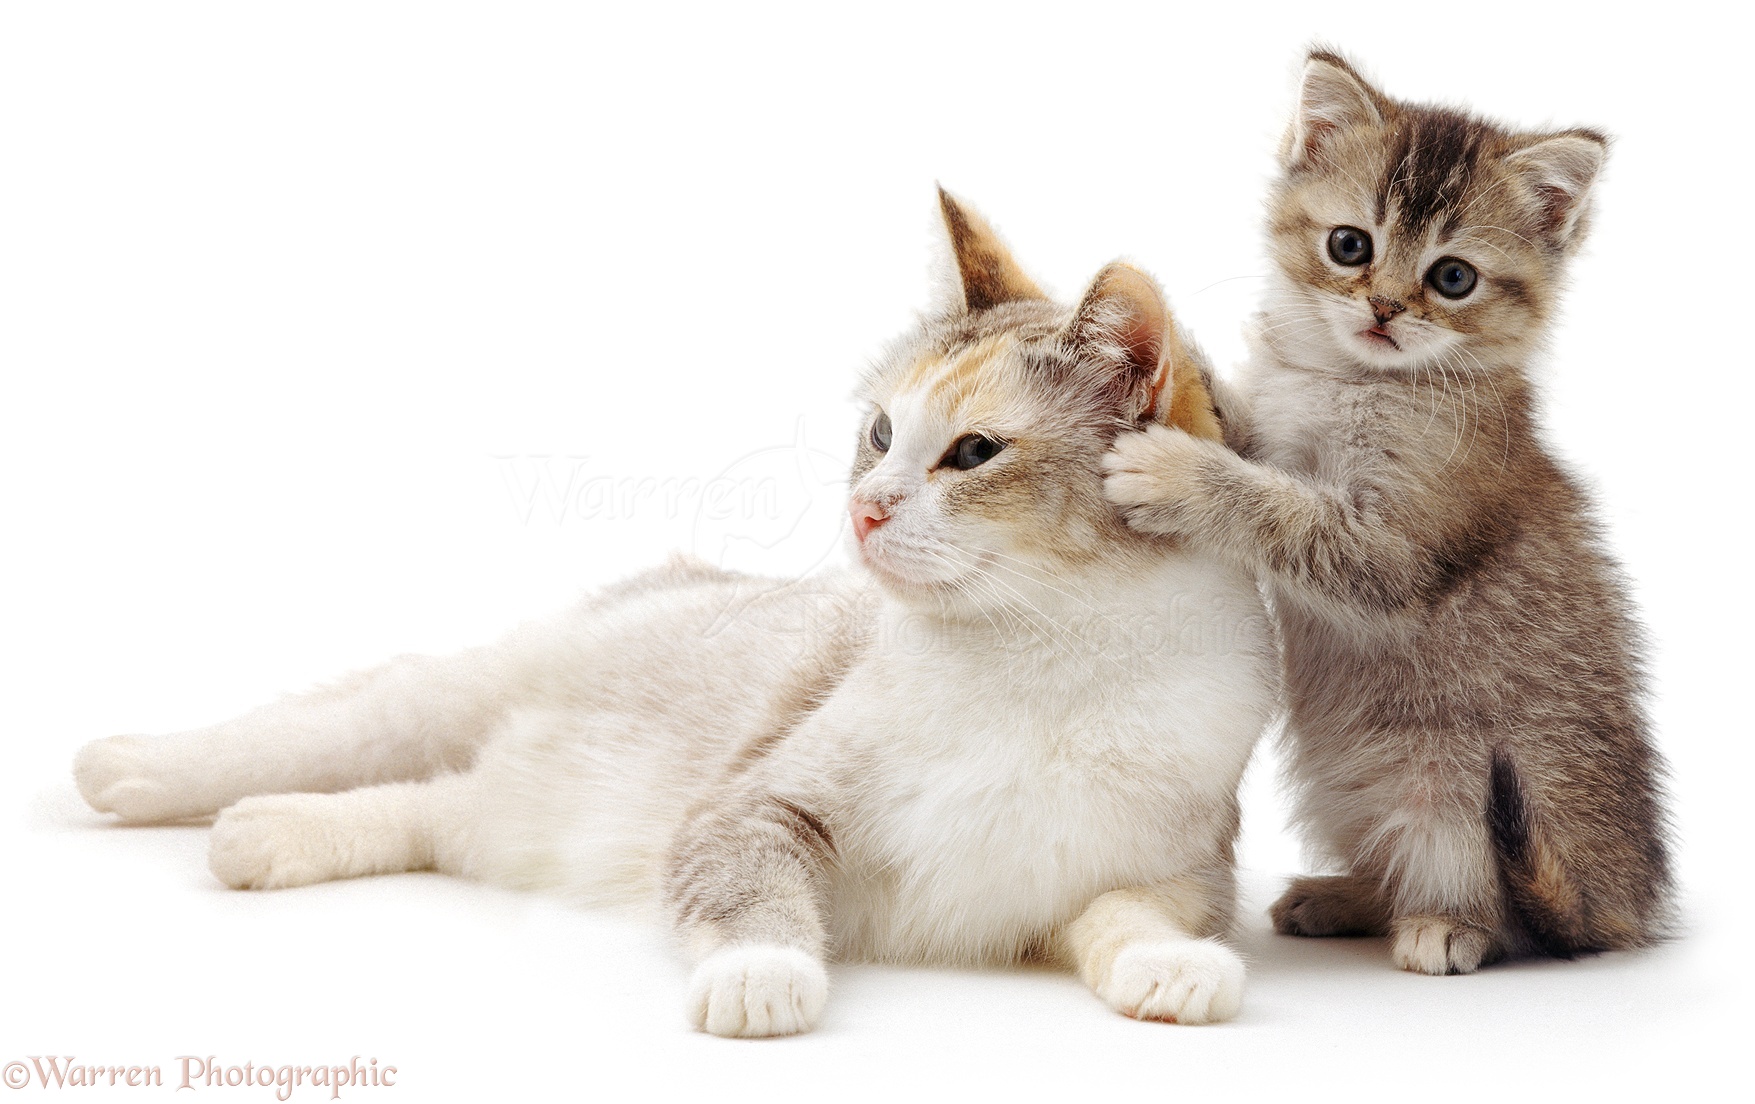 Cute Animals Pictures | Cute Cat and Kitten, WP04286.